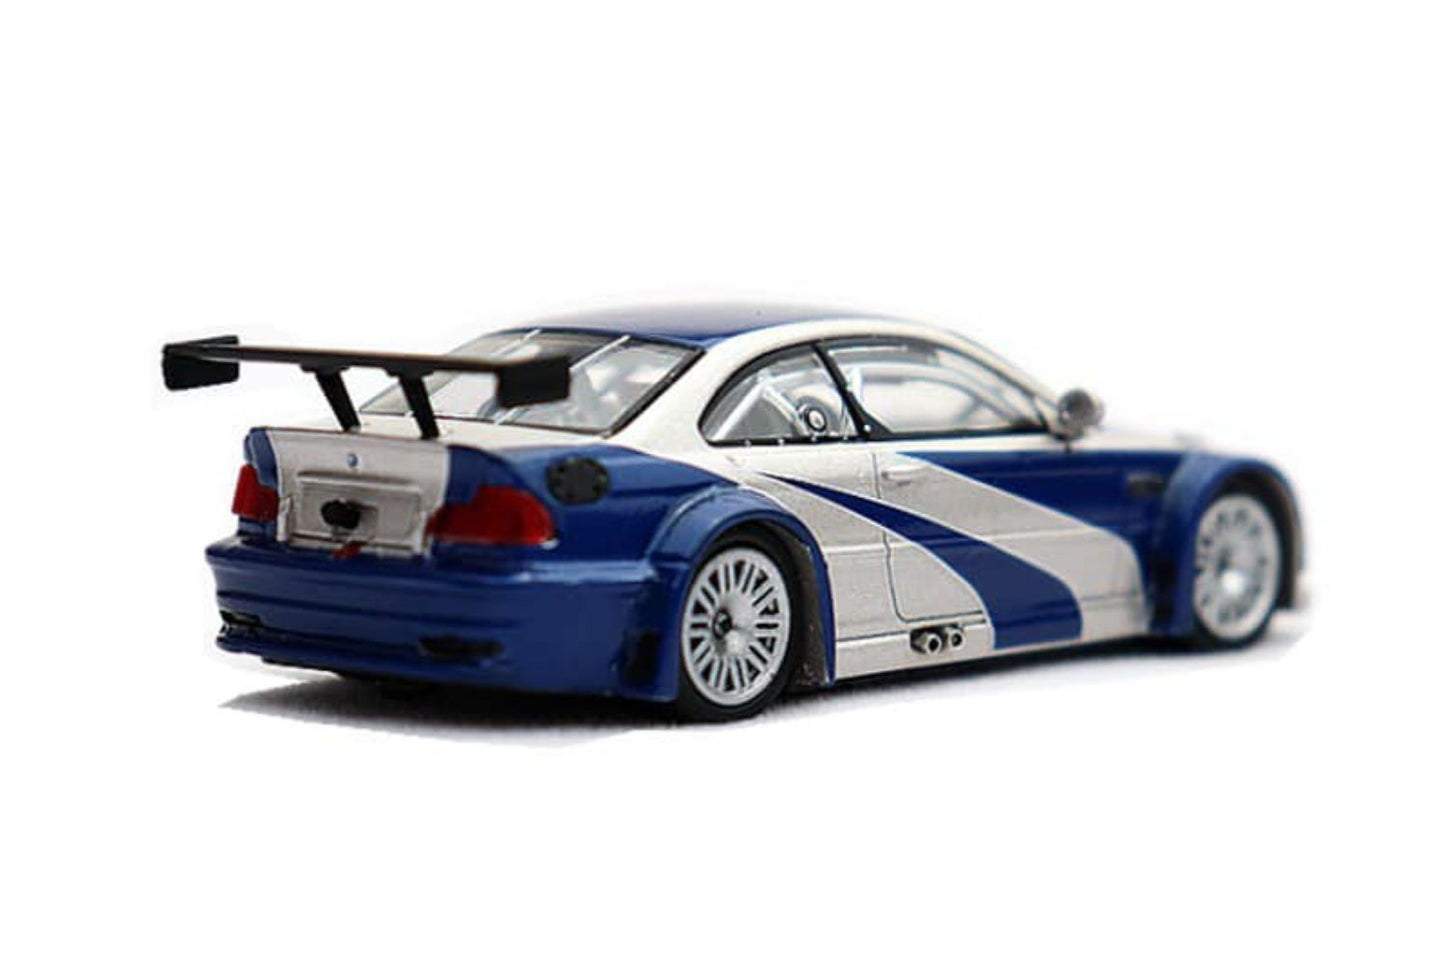 Ghost Player 1/64 BMW M3 (E46) GTR "Need For Speed Most Wanted" Livery